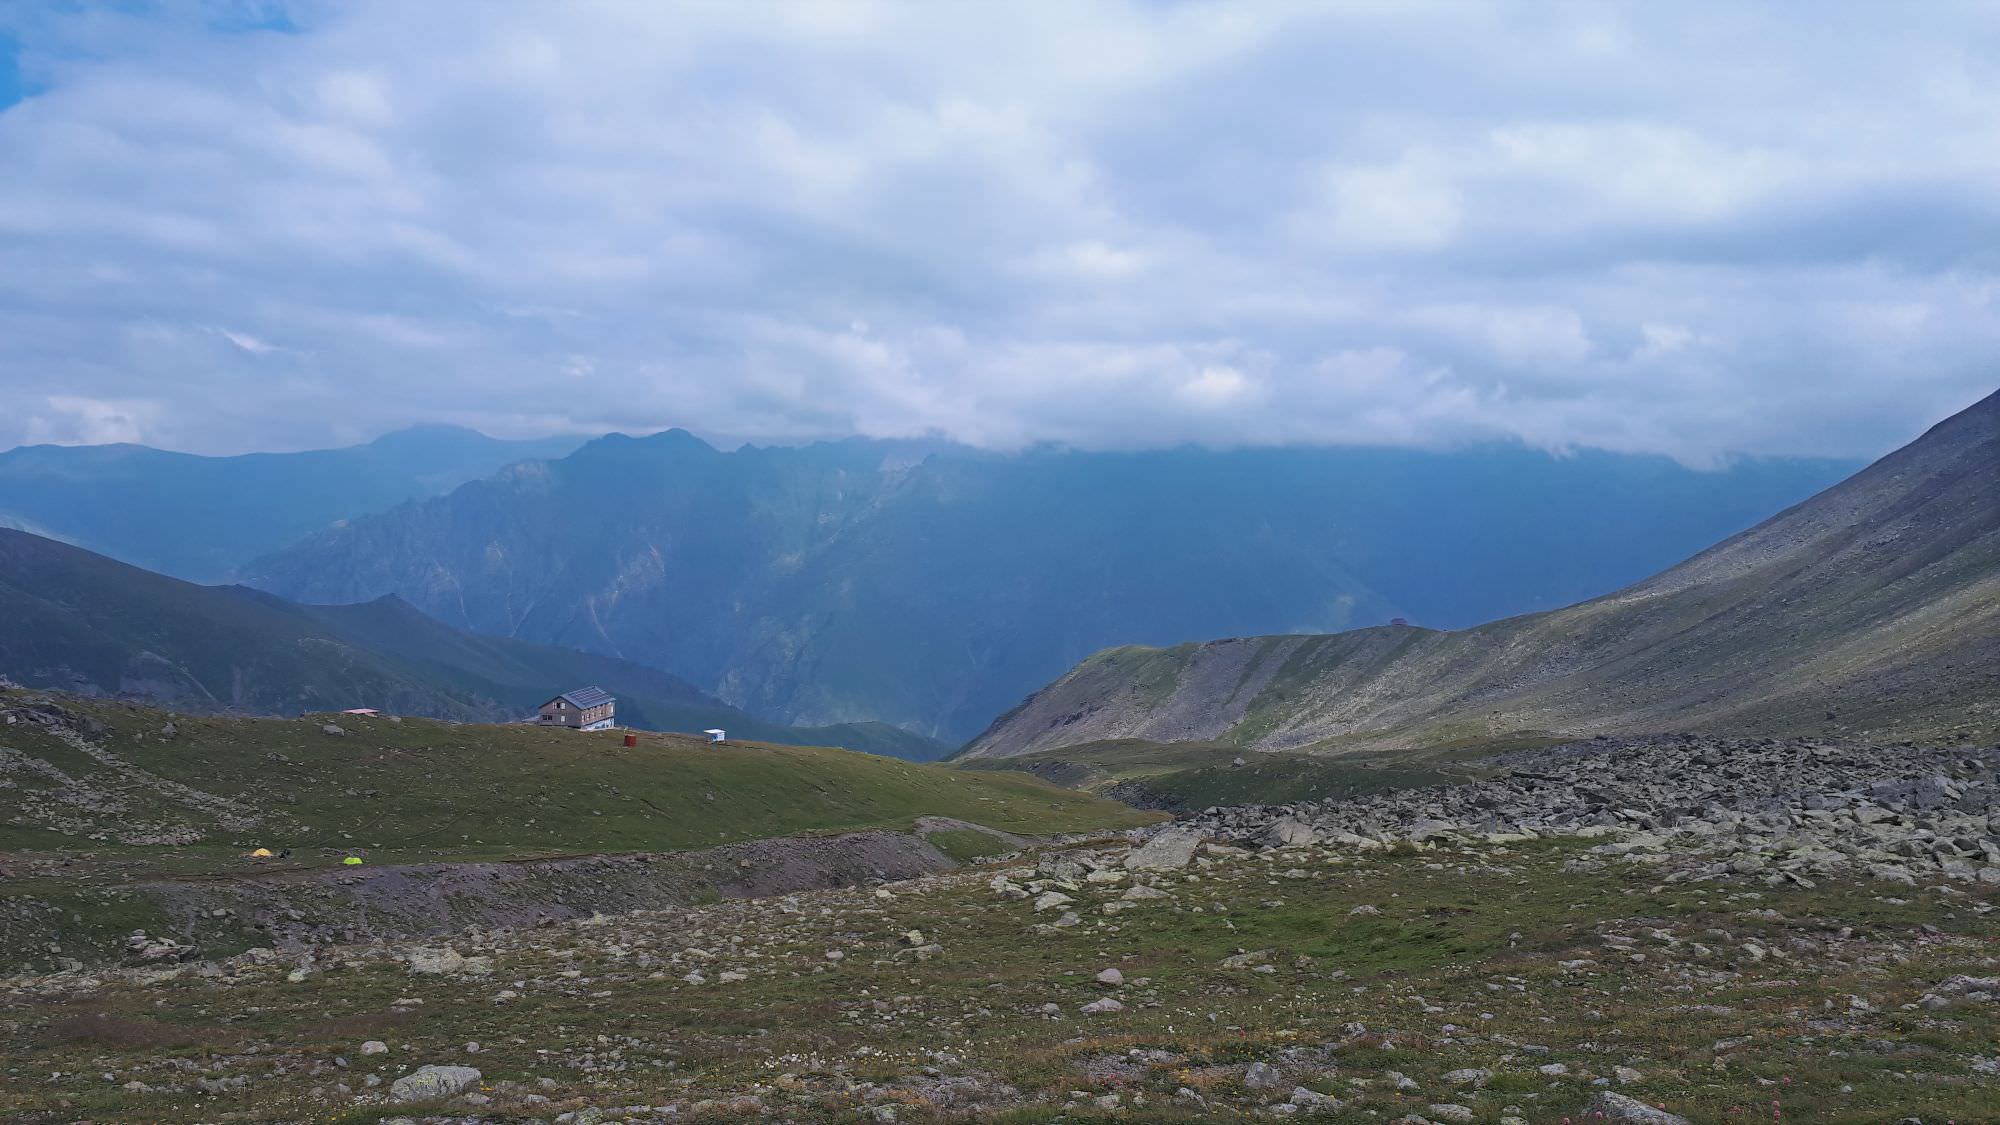 Altihut and Sabertse pass visible from the Arsha pass